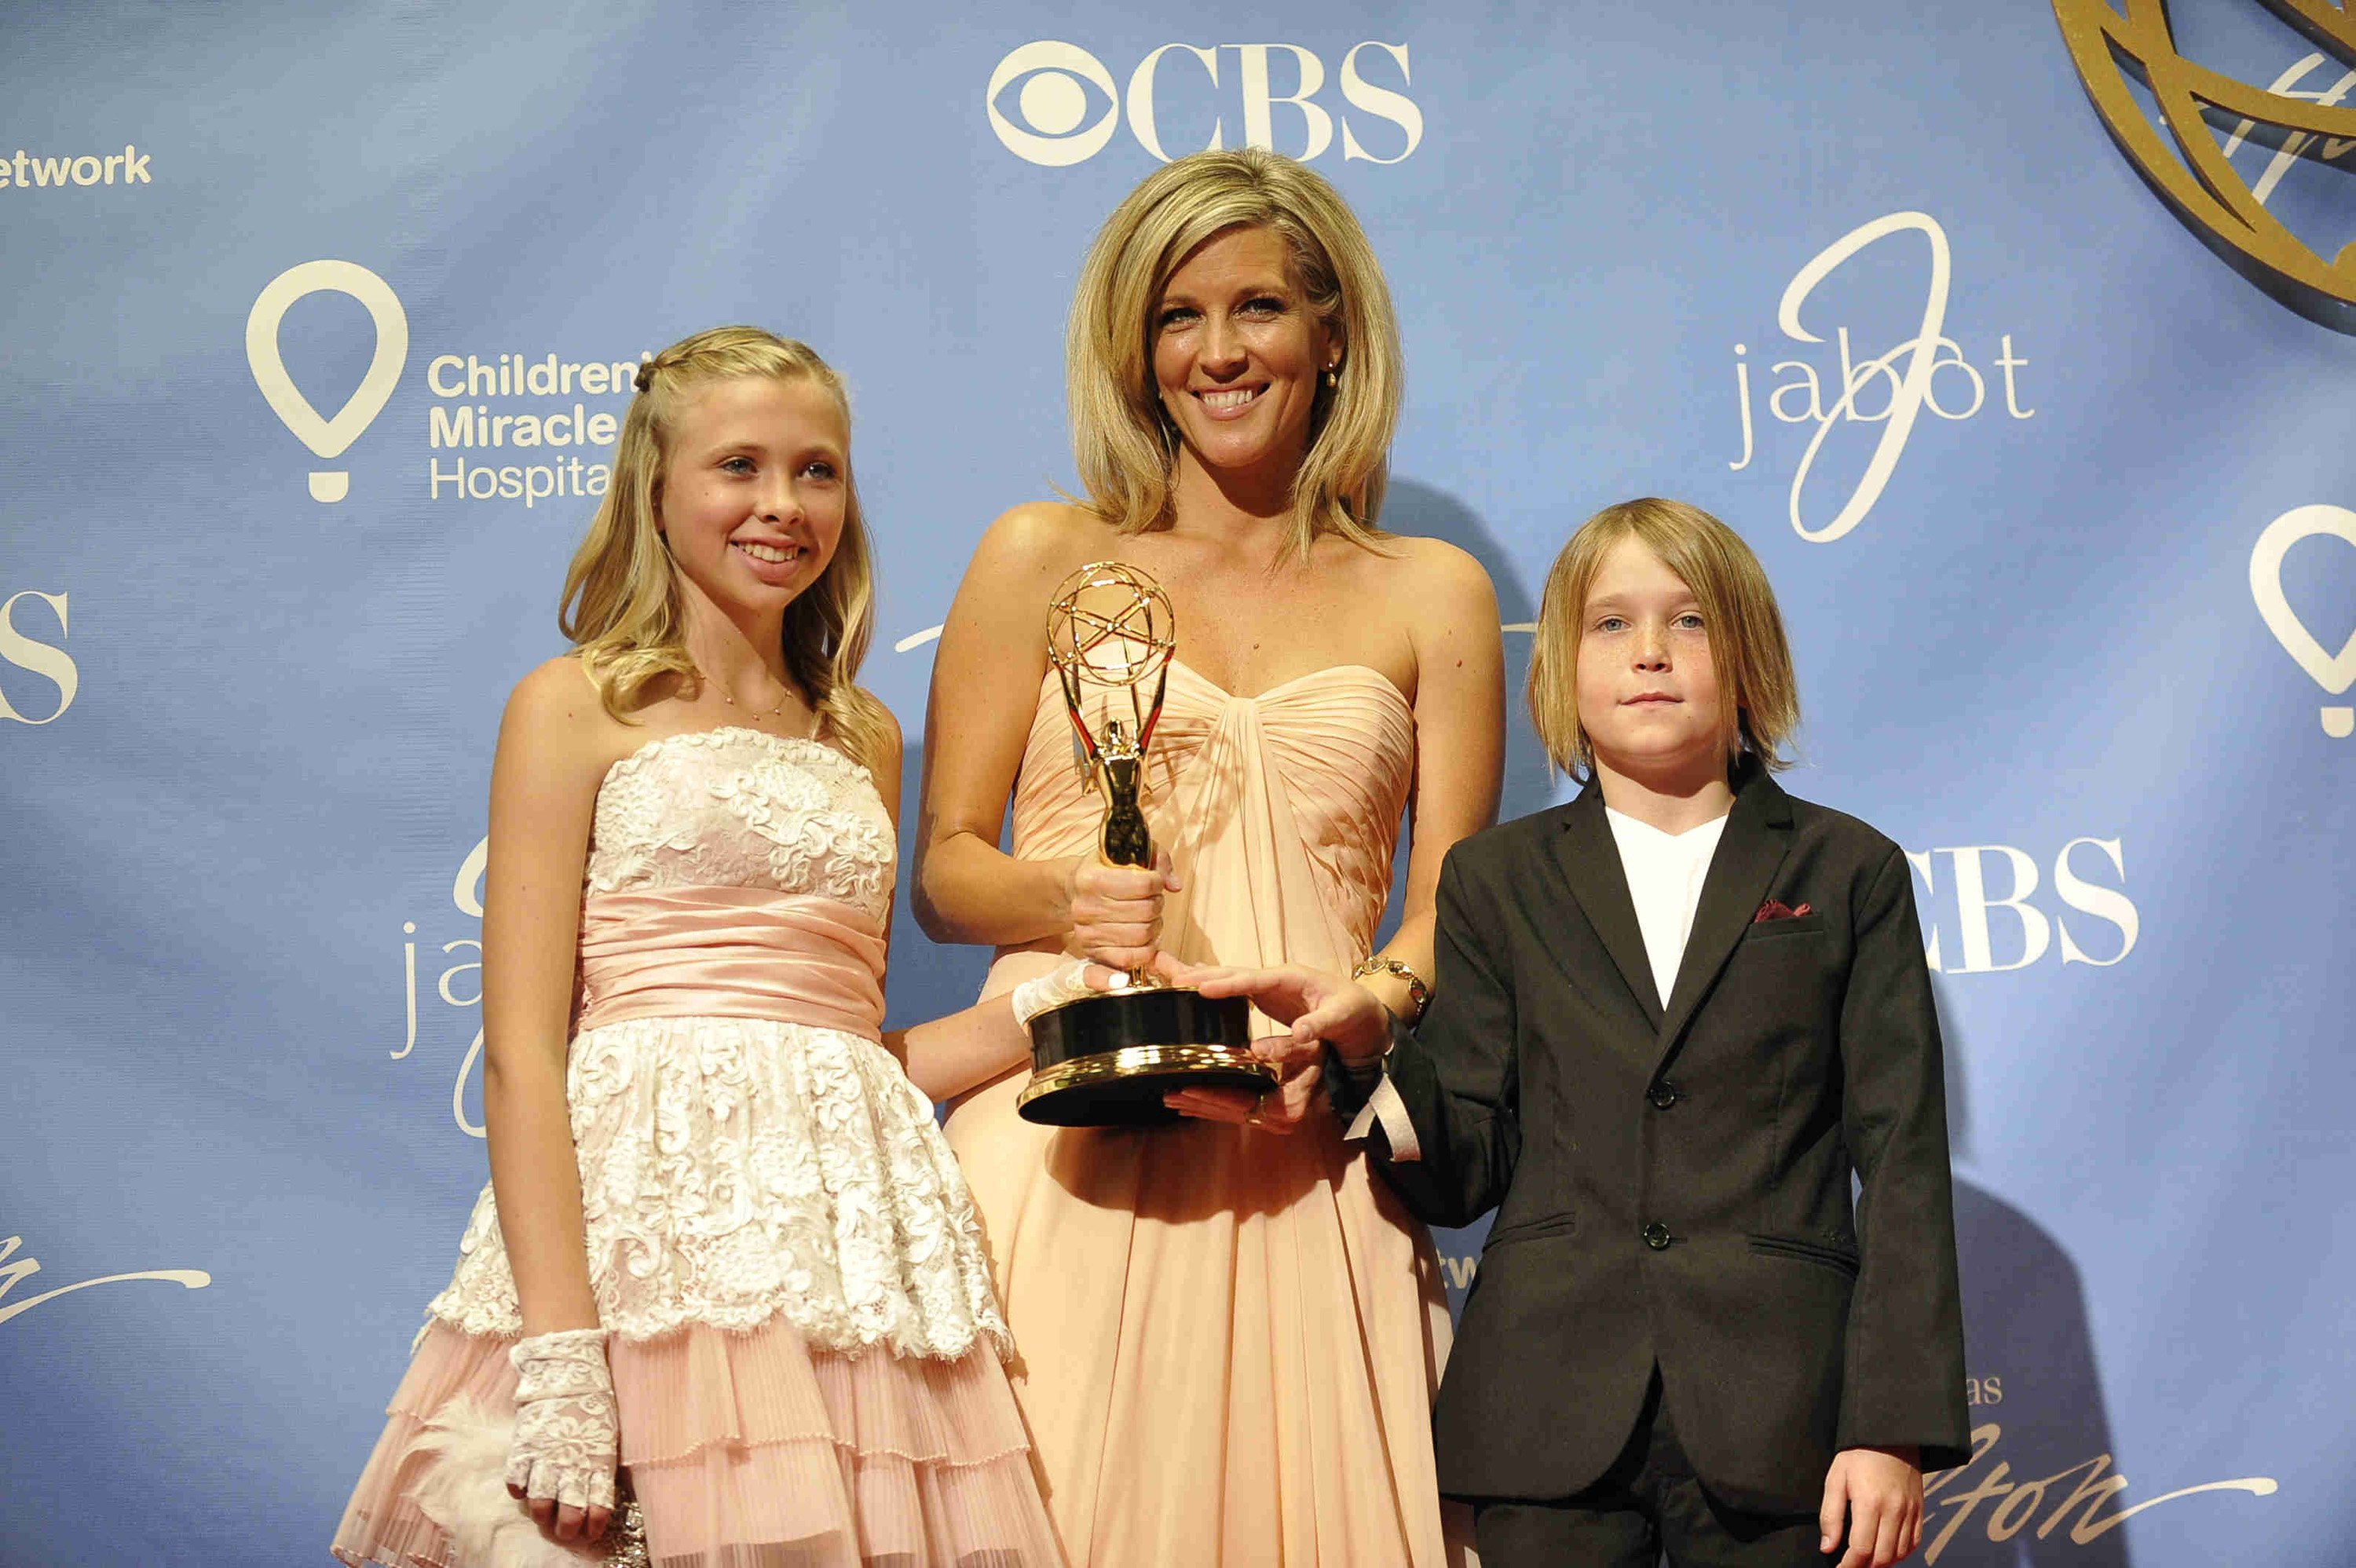 Laura Wright with her children at the 38th Annual Daytime Entertainment Emmy Awards in 2011 in Las Vegas. | Source: Getty Images